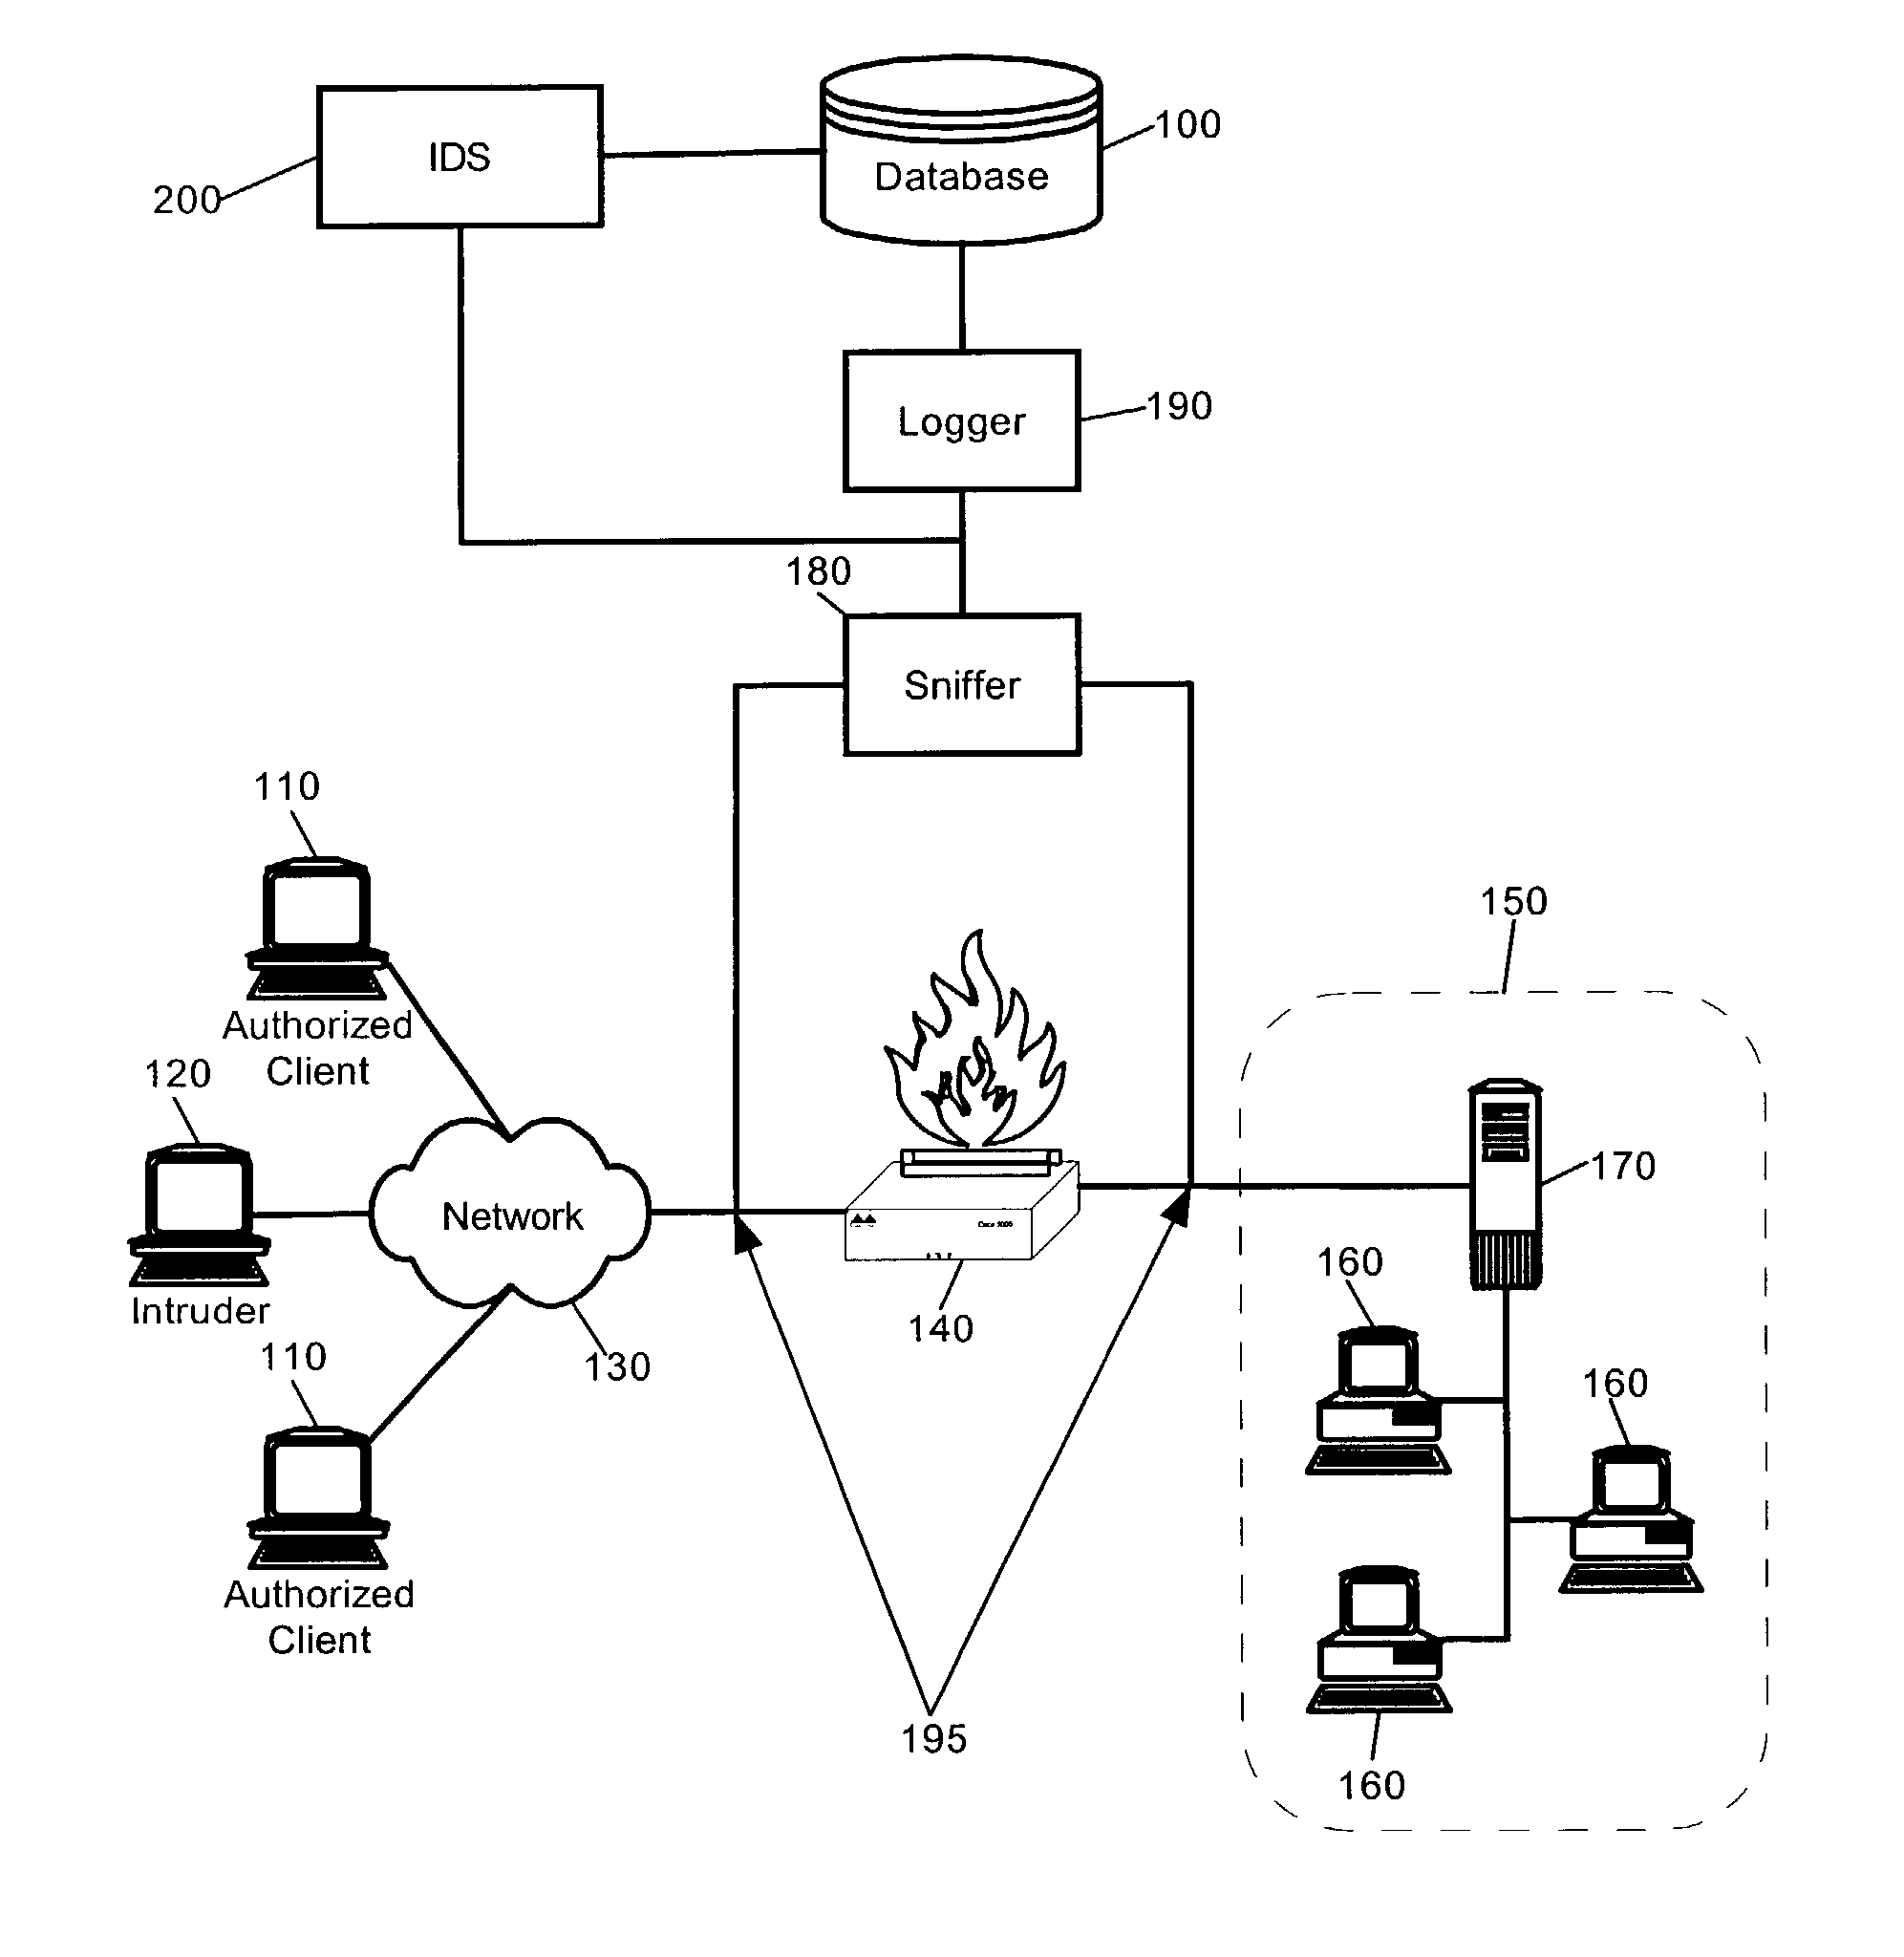 Intrusion detection system using self-organizing clusters